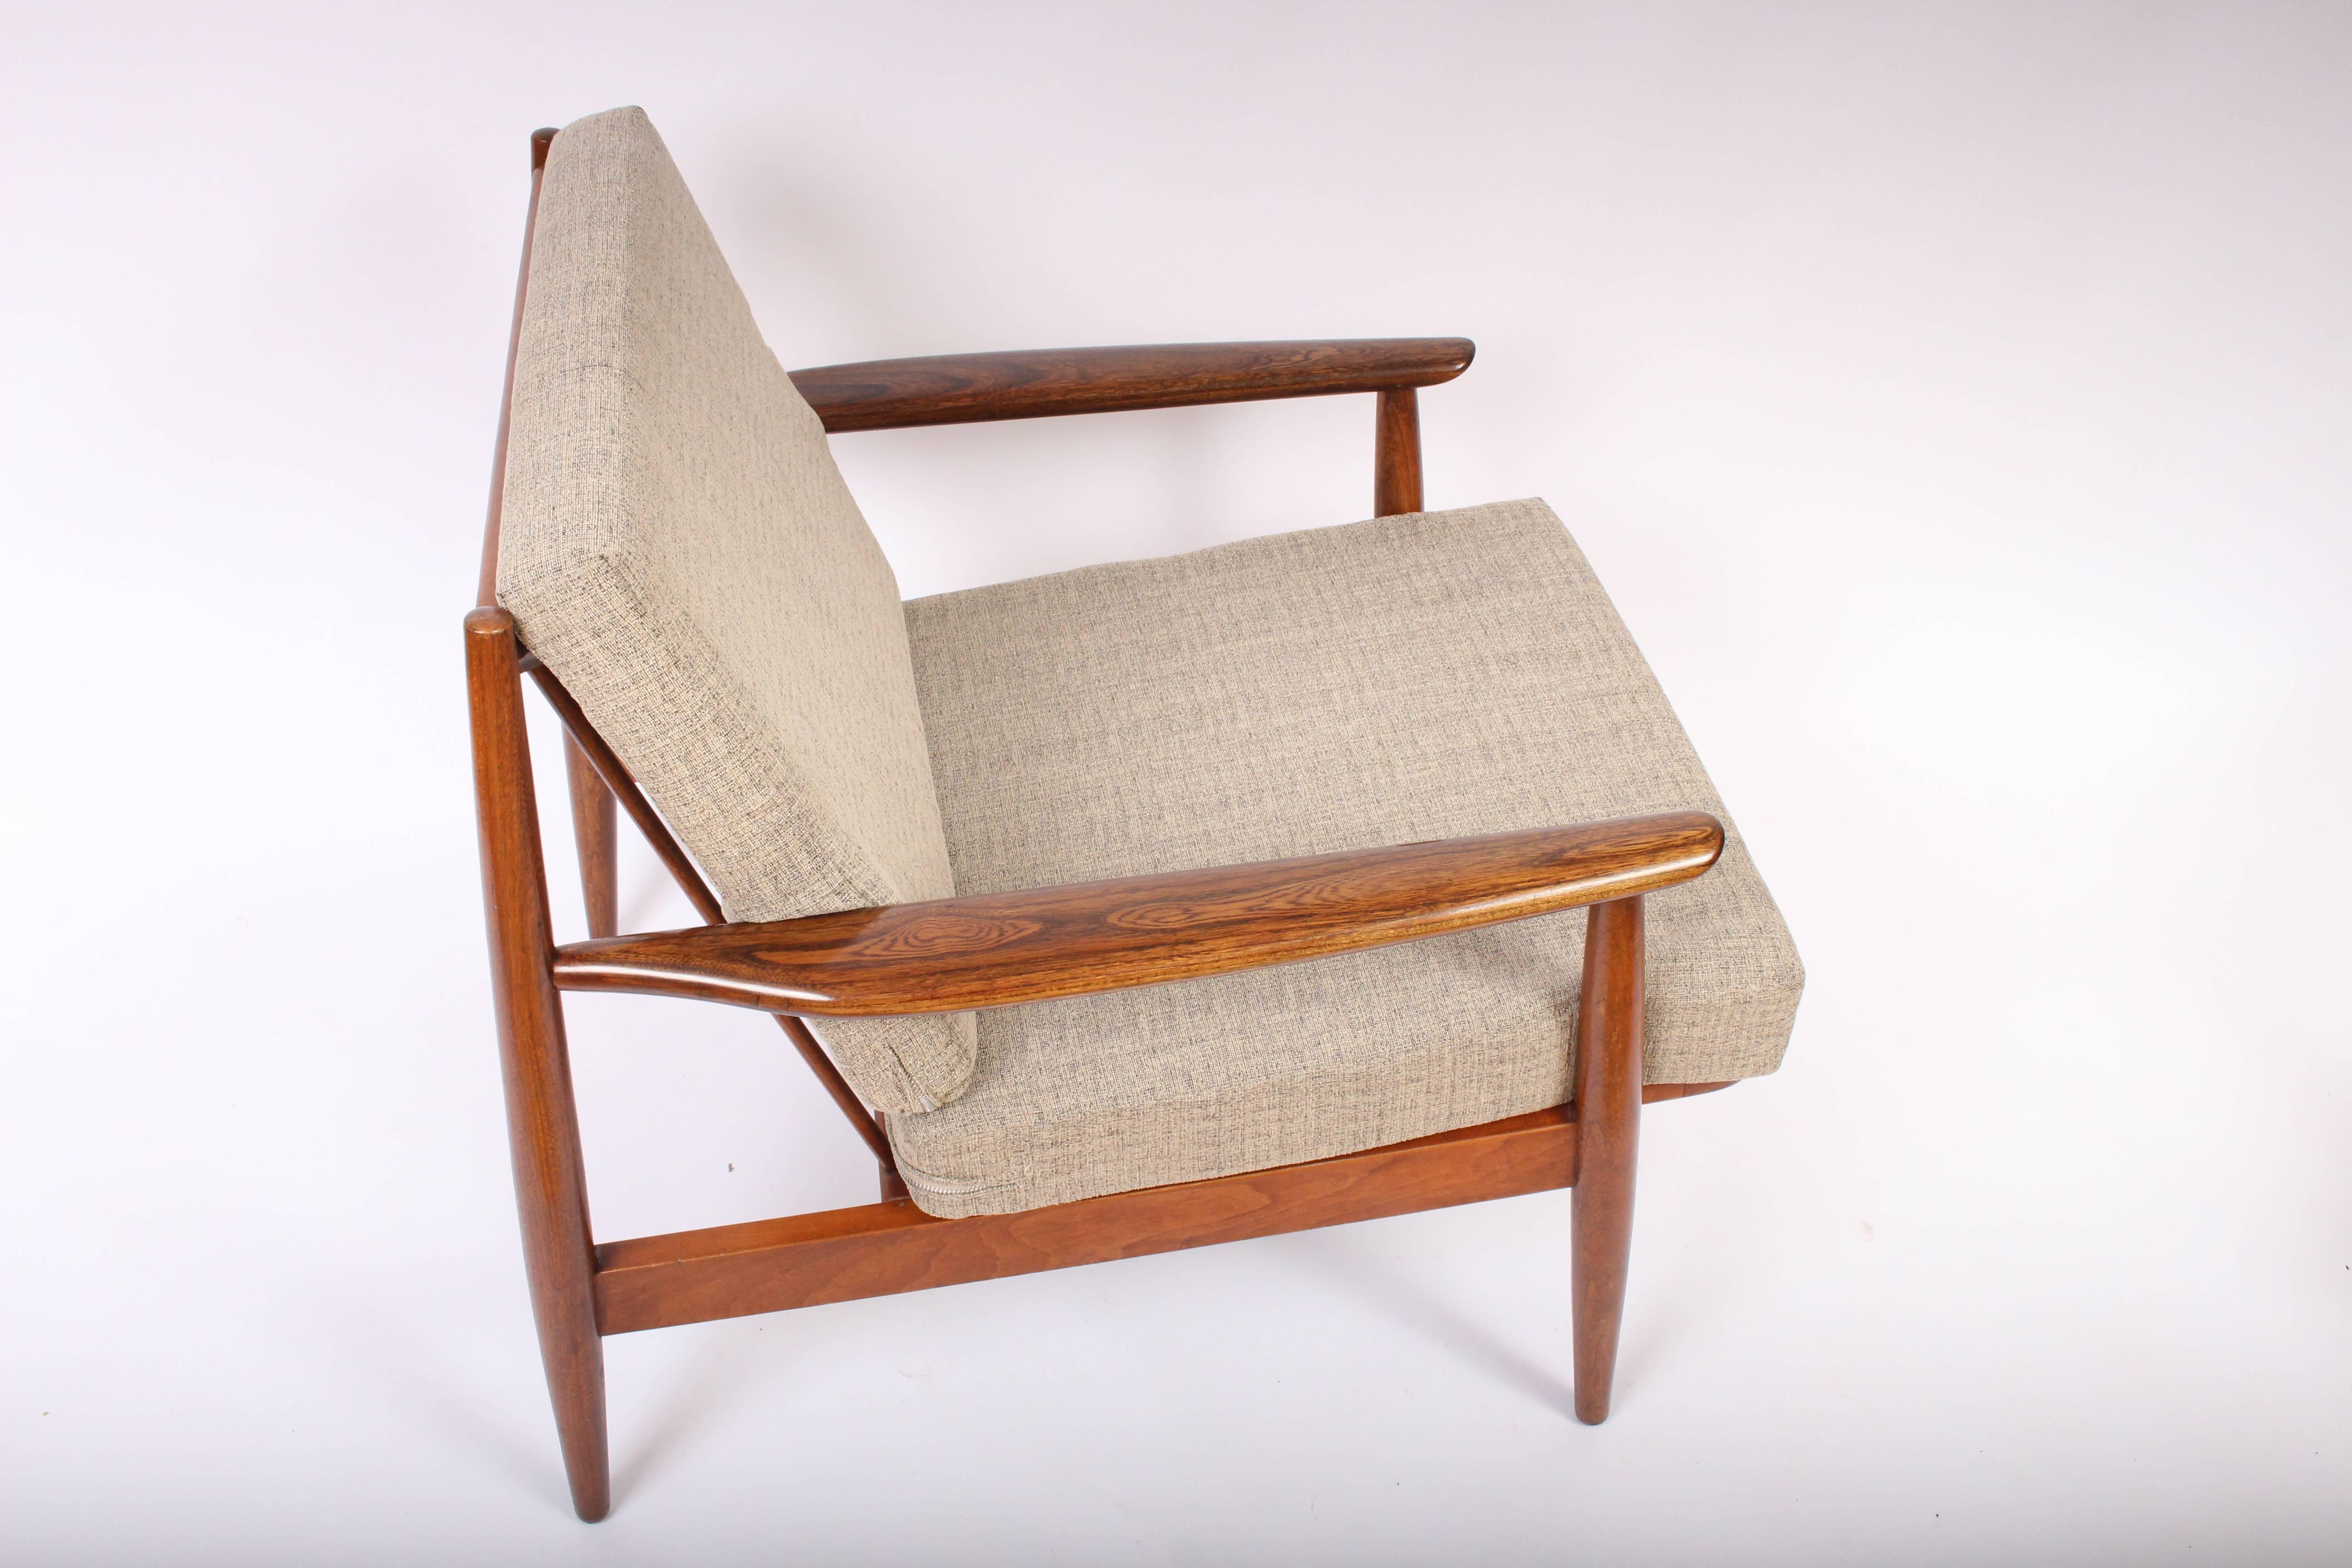 American Mid Century Viko Baumritter for Baumritter of New York Wide Walnut Lounge Chairs. Featuring a Spindle back, sculpted armrests, dowel legs and new webbing. With newly upholstered reversible cushions in a neutral Oatmeal, Buckwheat fabric.